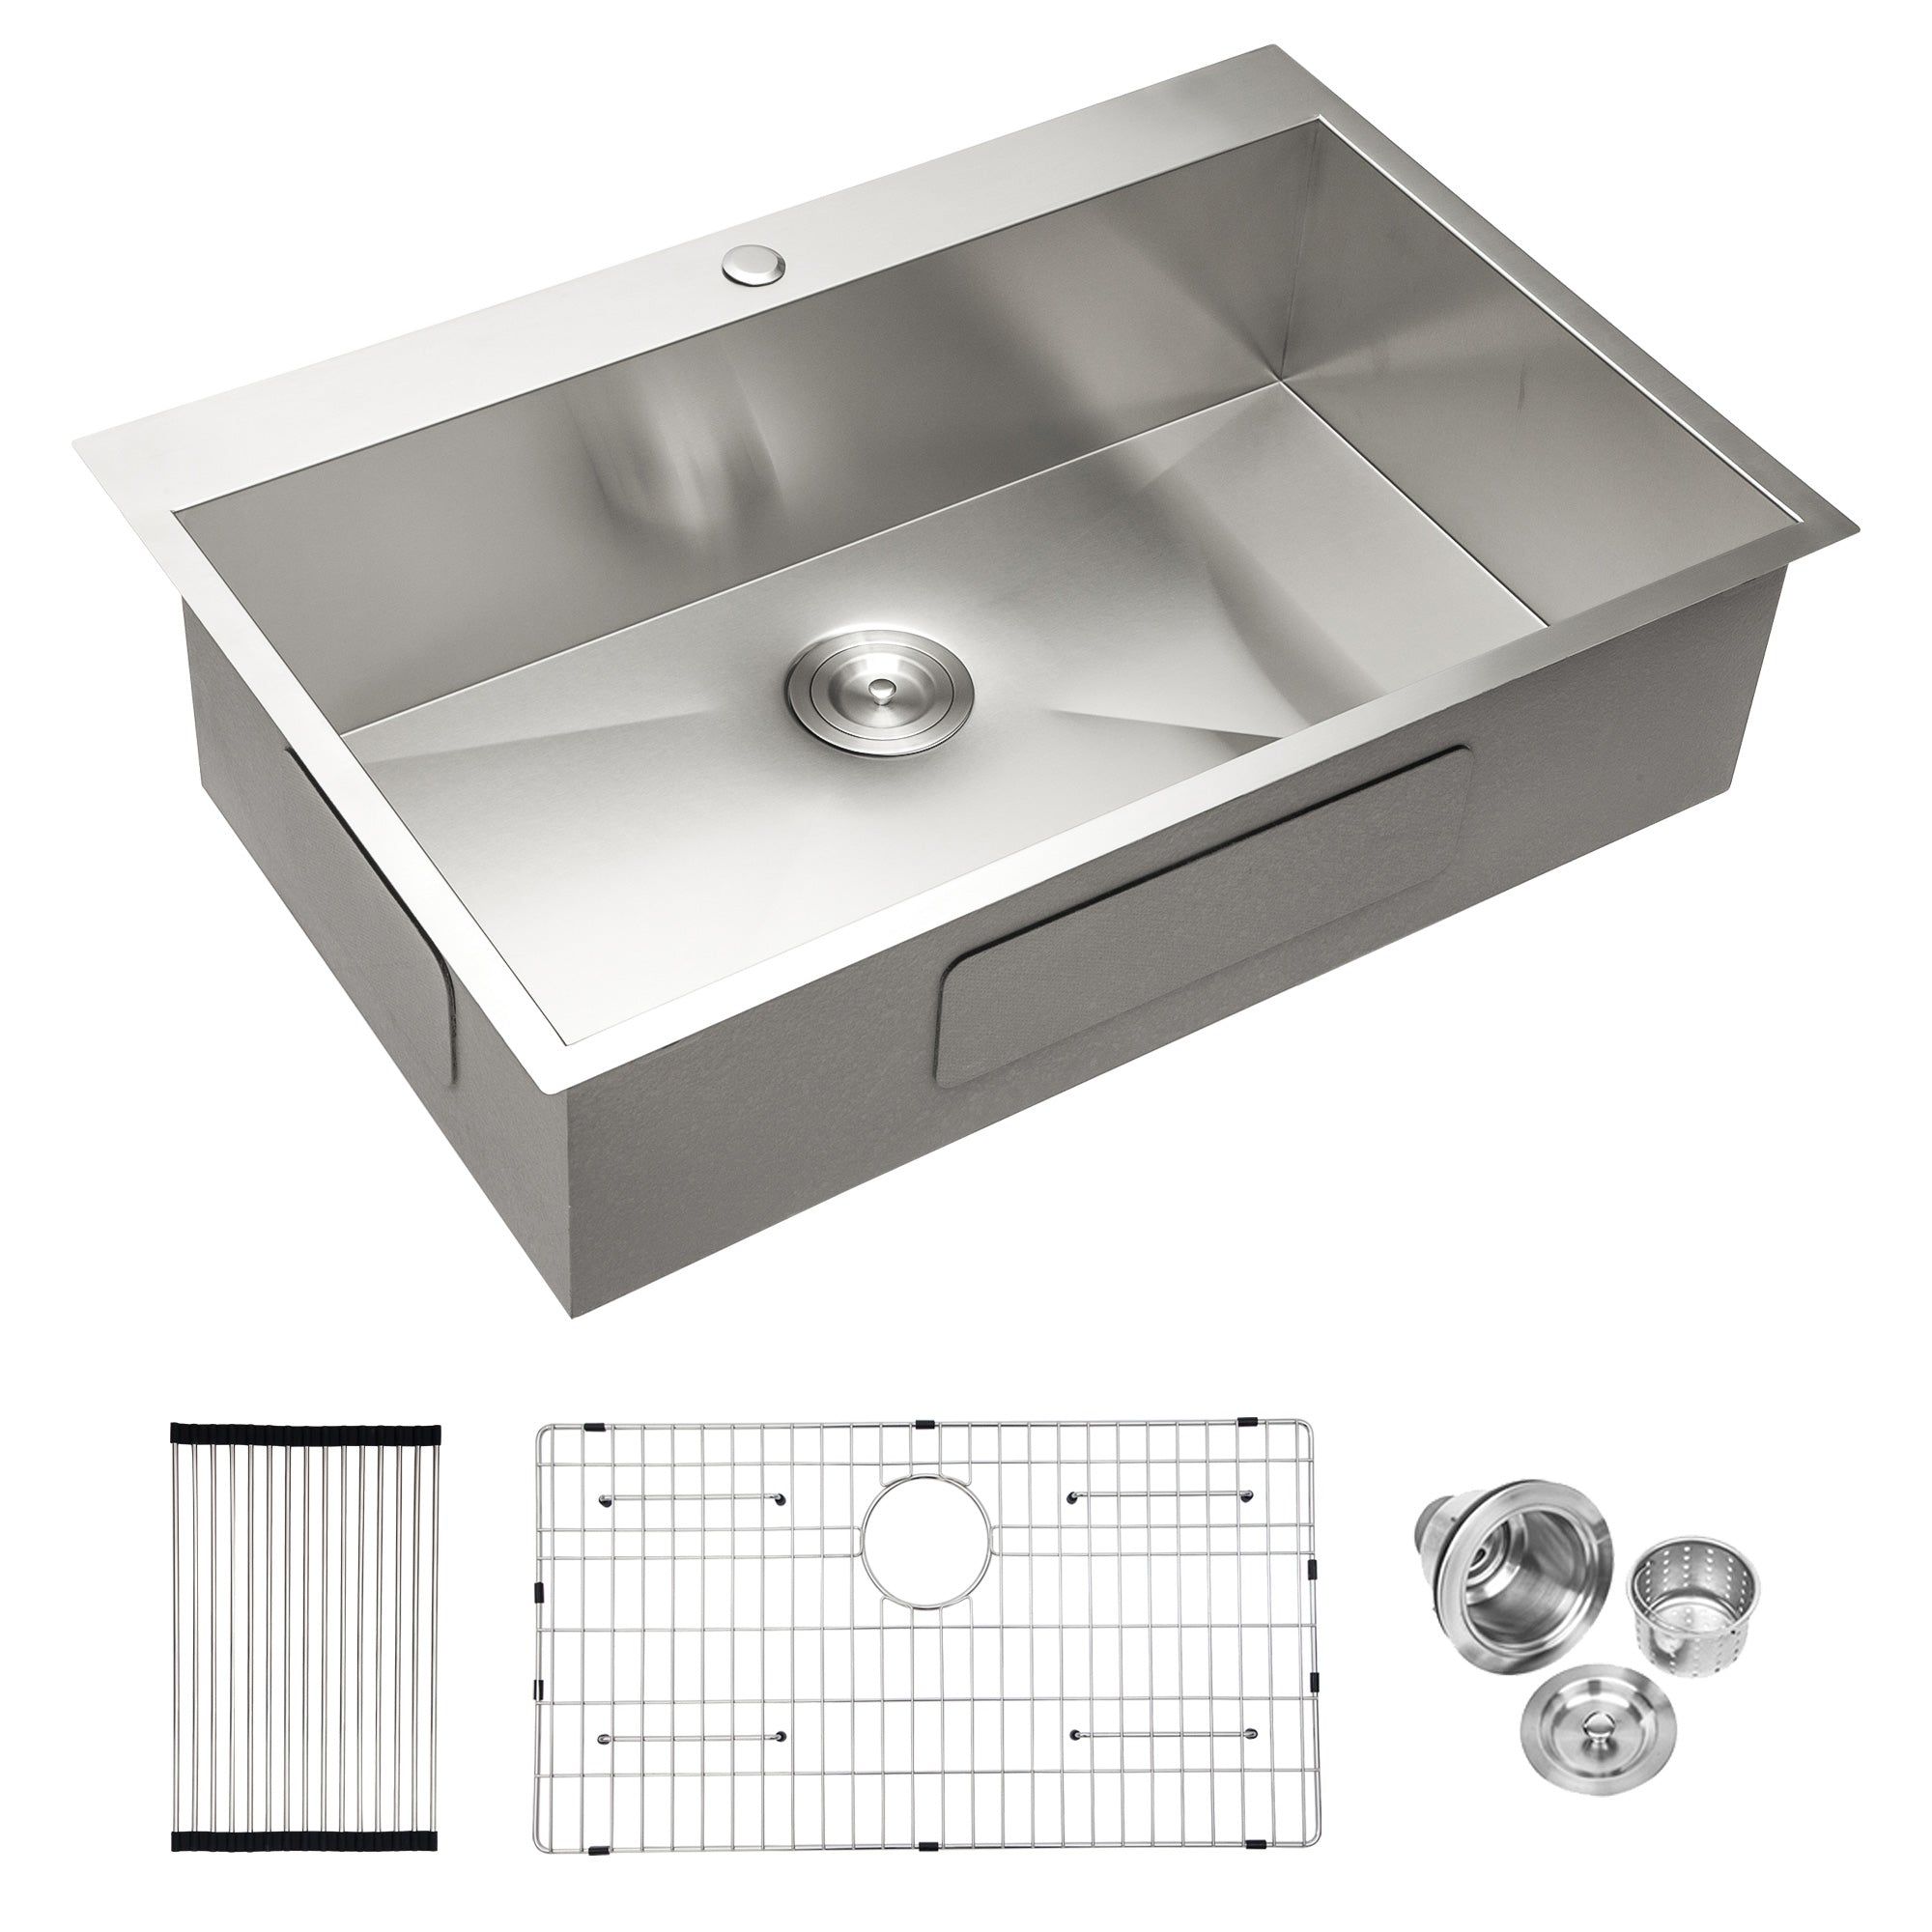 Drop-in Single Bowl Stainless Steel Kitchen Sink RX-SS14